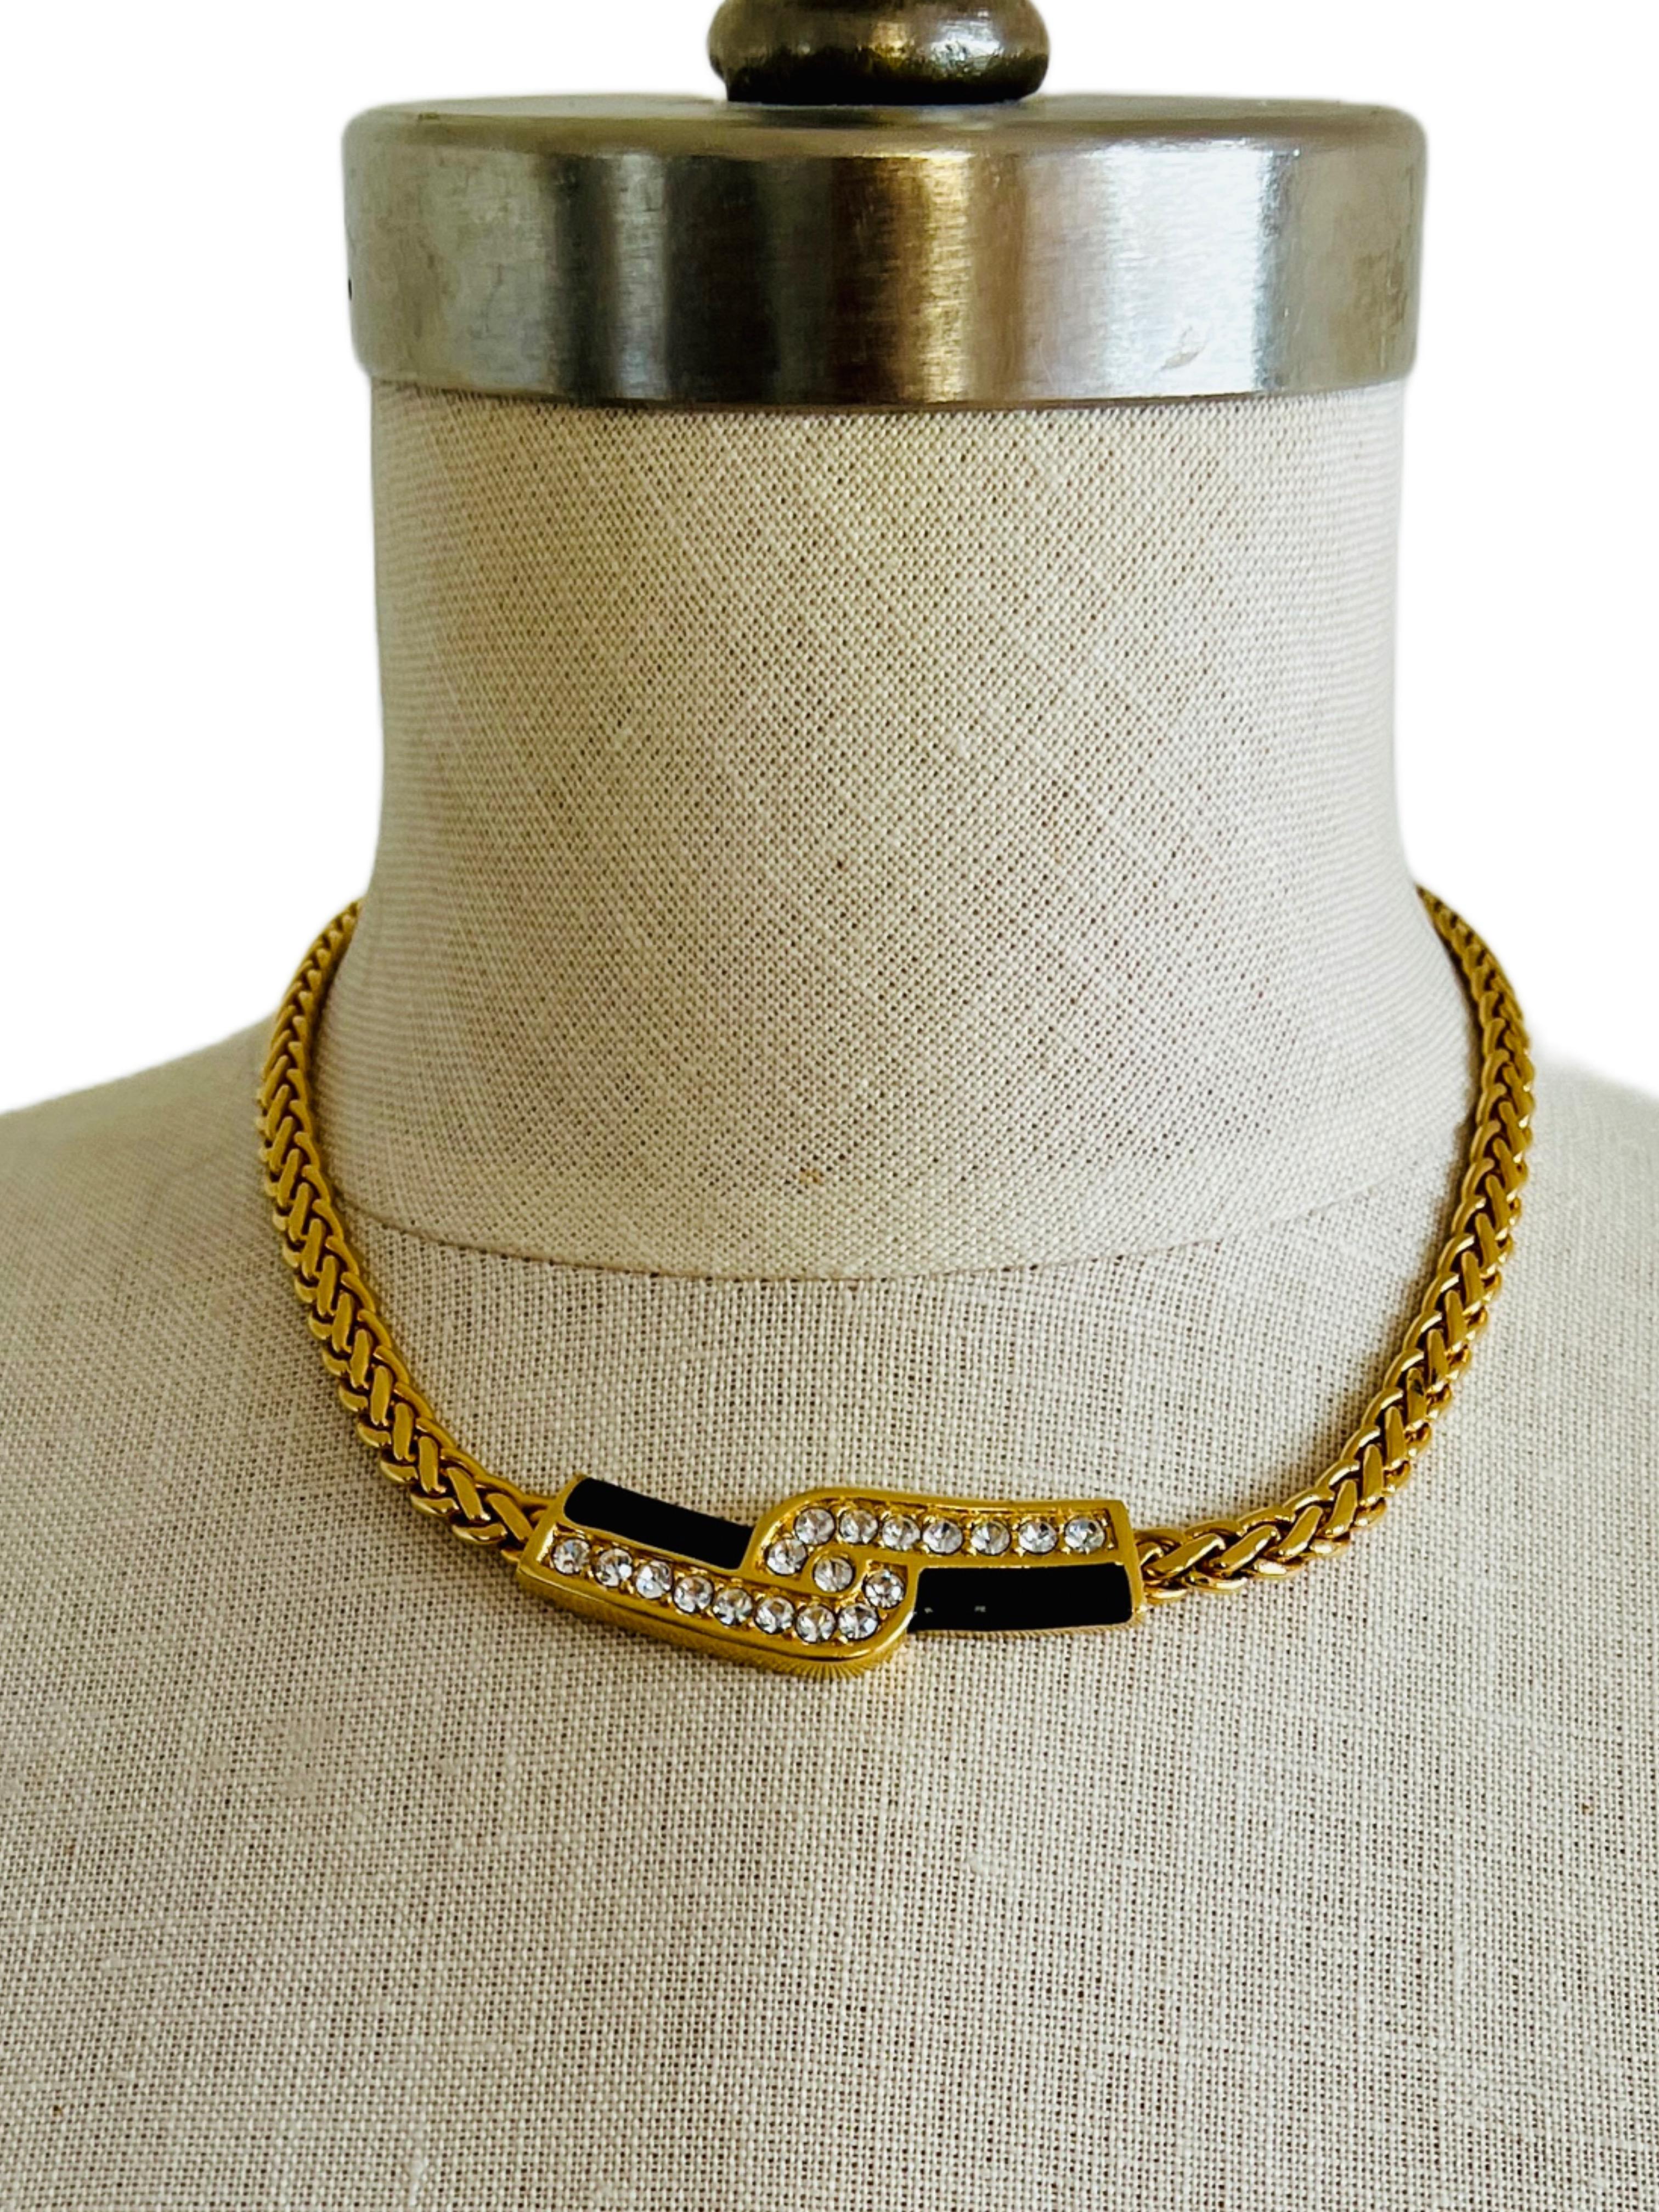 Add a touch of glamour to your outfit with this vintage Swarovski choker necklace from the 1980s. The necklace features a black enamel and gold pavé rhinestone bar pendant on a gold plated flattened wheat Spiga chain. This statement choker necklace